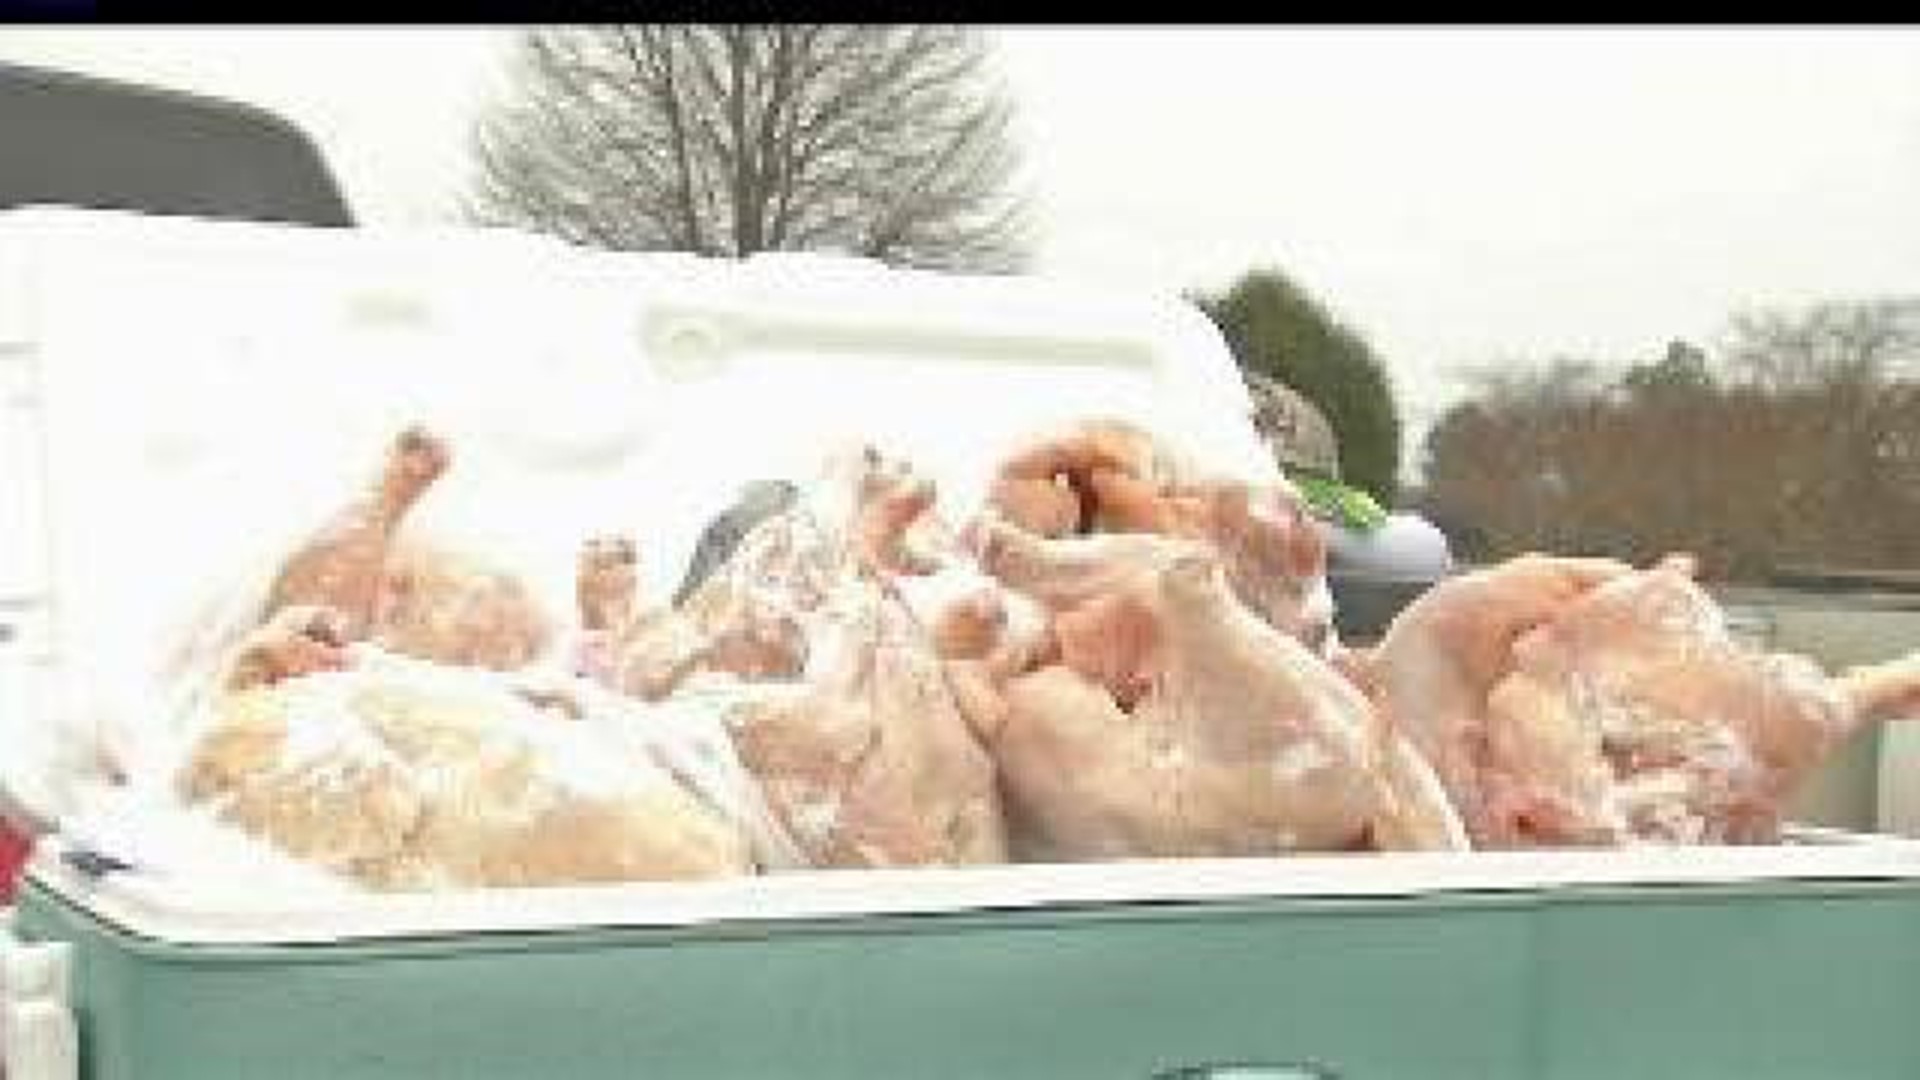 Chickens found on highway make for Christmas miracle